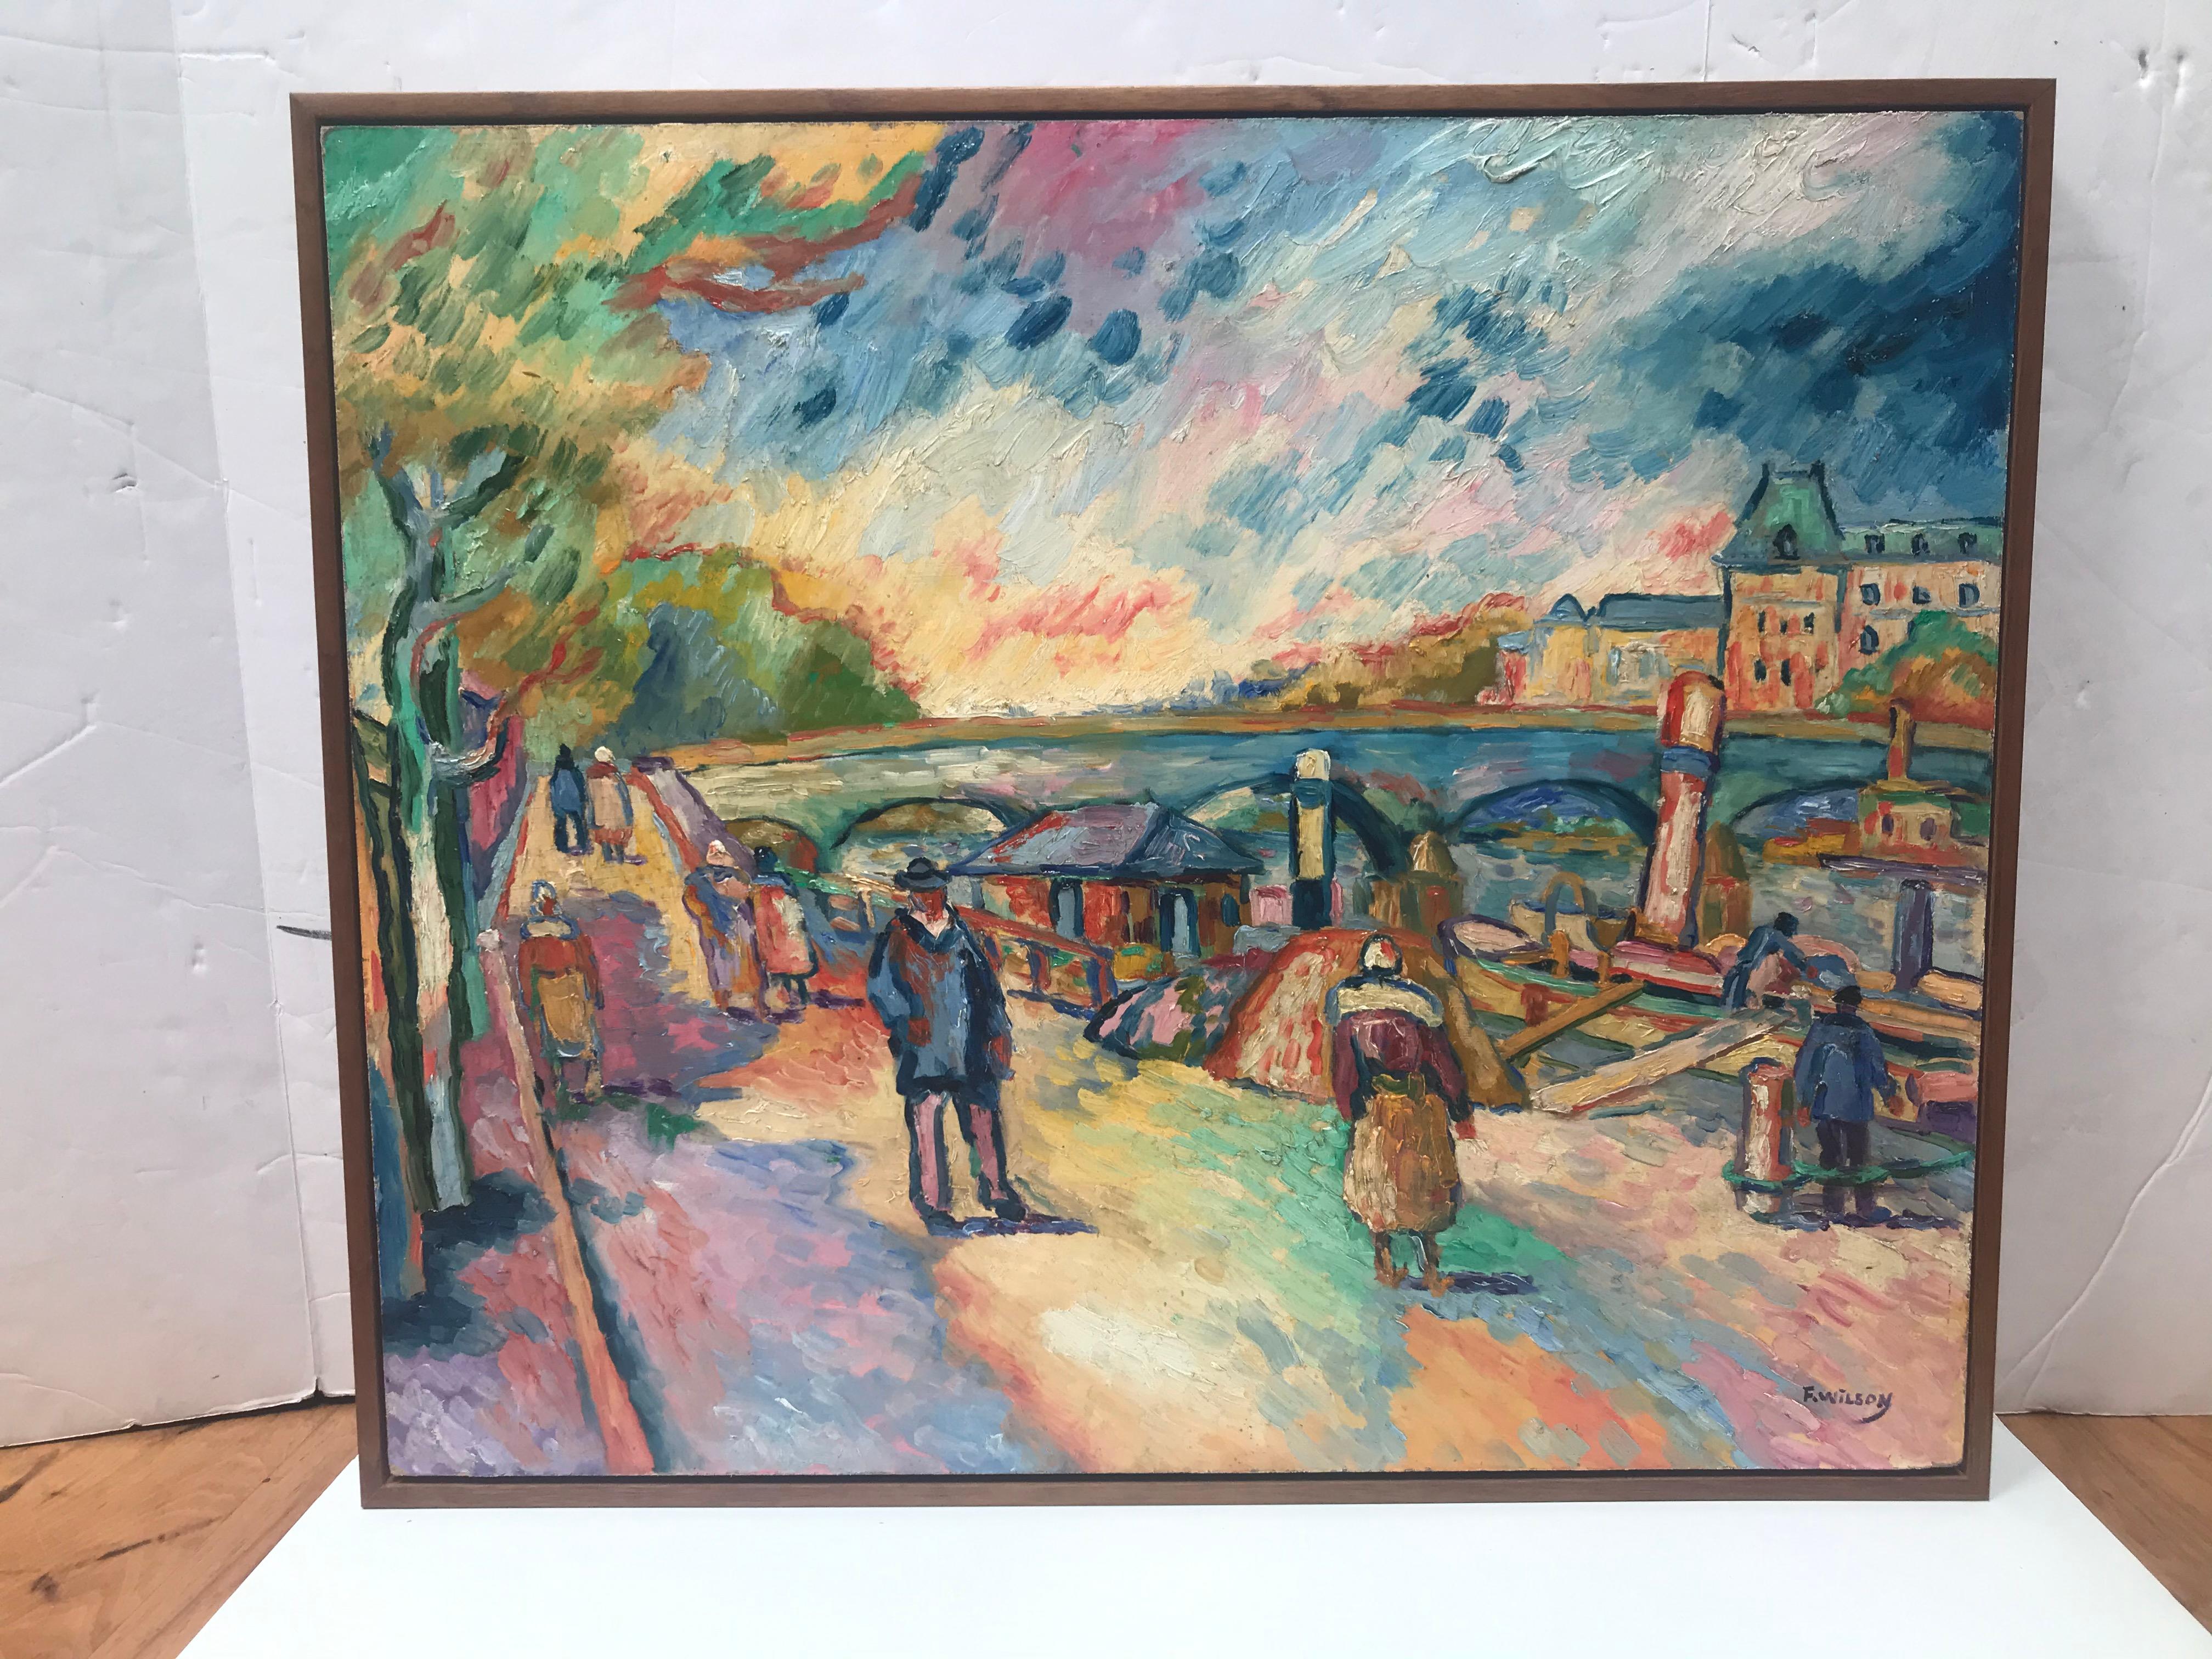 Pat Wilson was a French painter born in 1868 and who died in 1928.
She lived in France and part of her life in the Maghreb.
This painting shows perfectly the influence of the Fauvism art movement with its strong colors.
The painter started at the